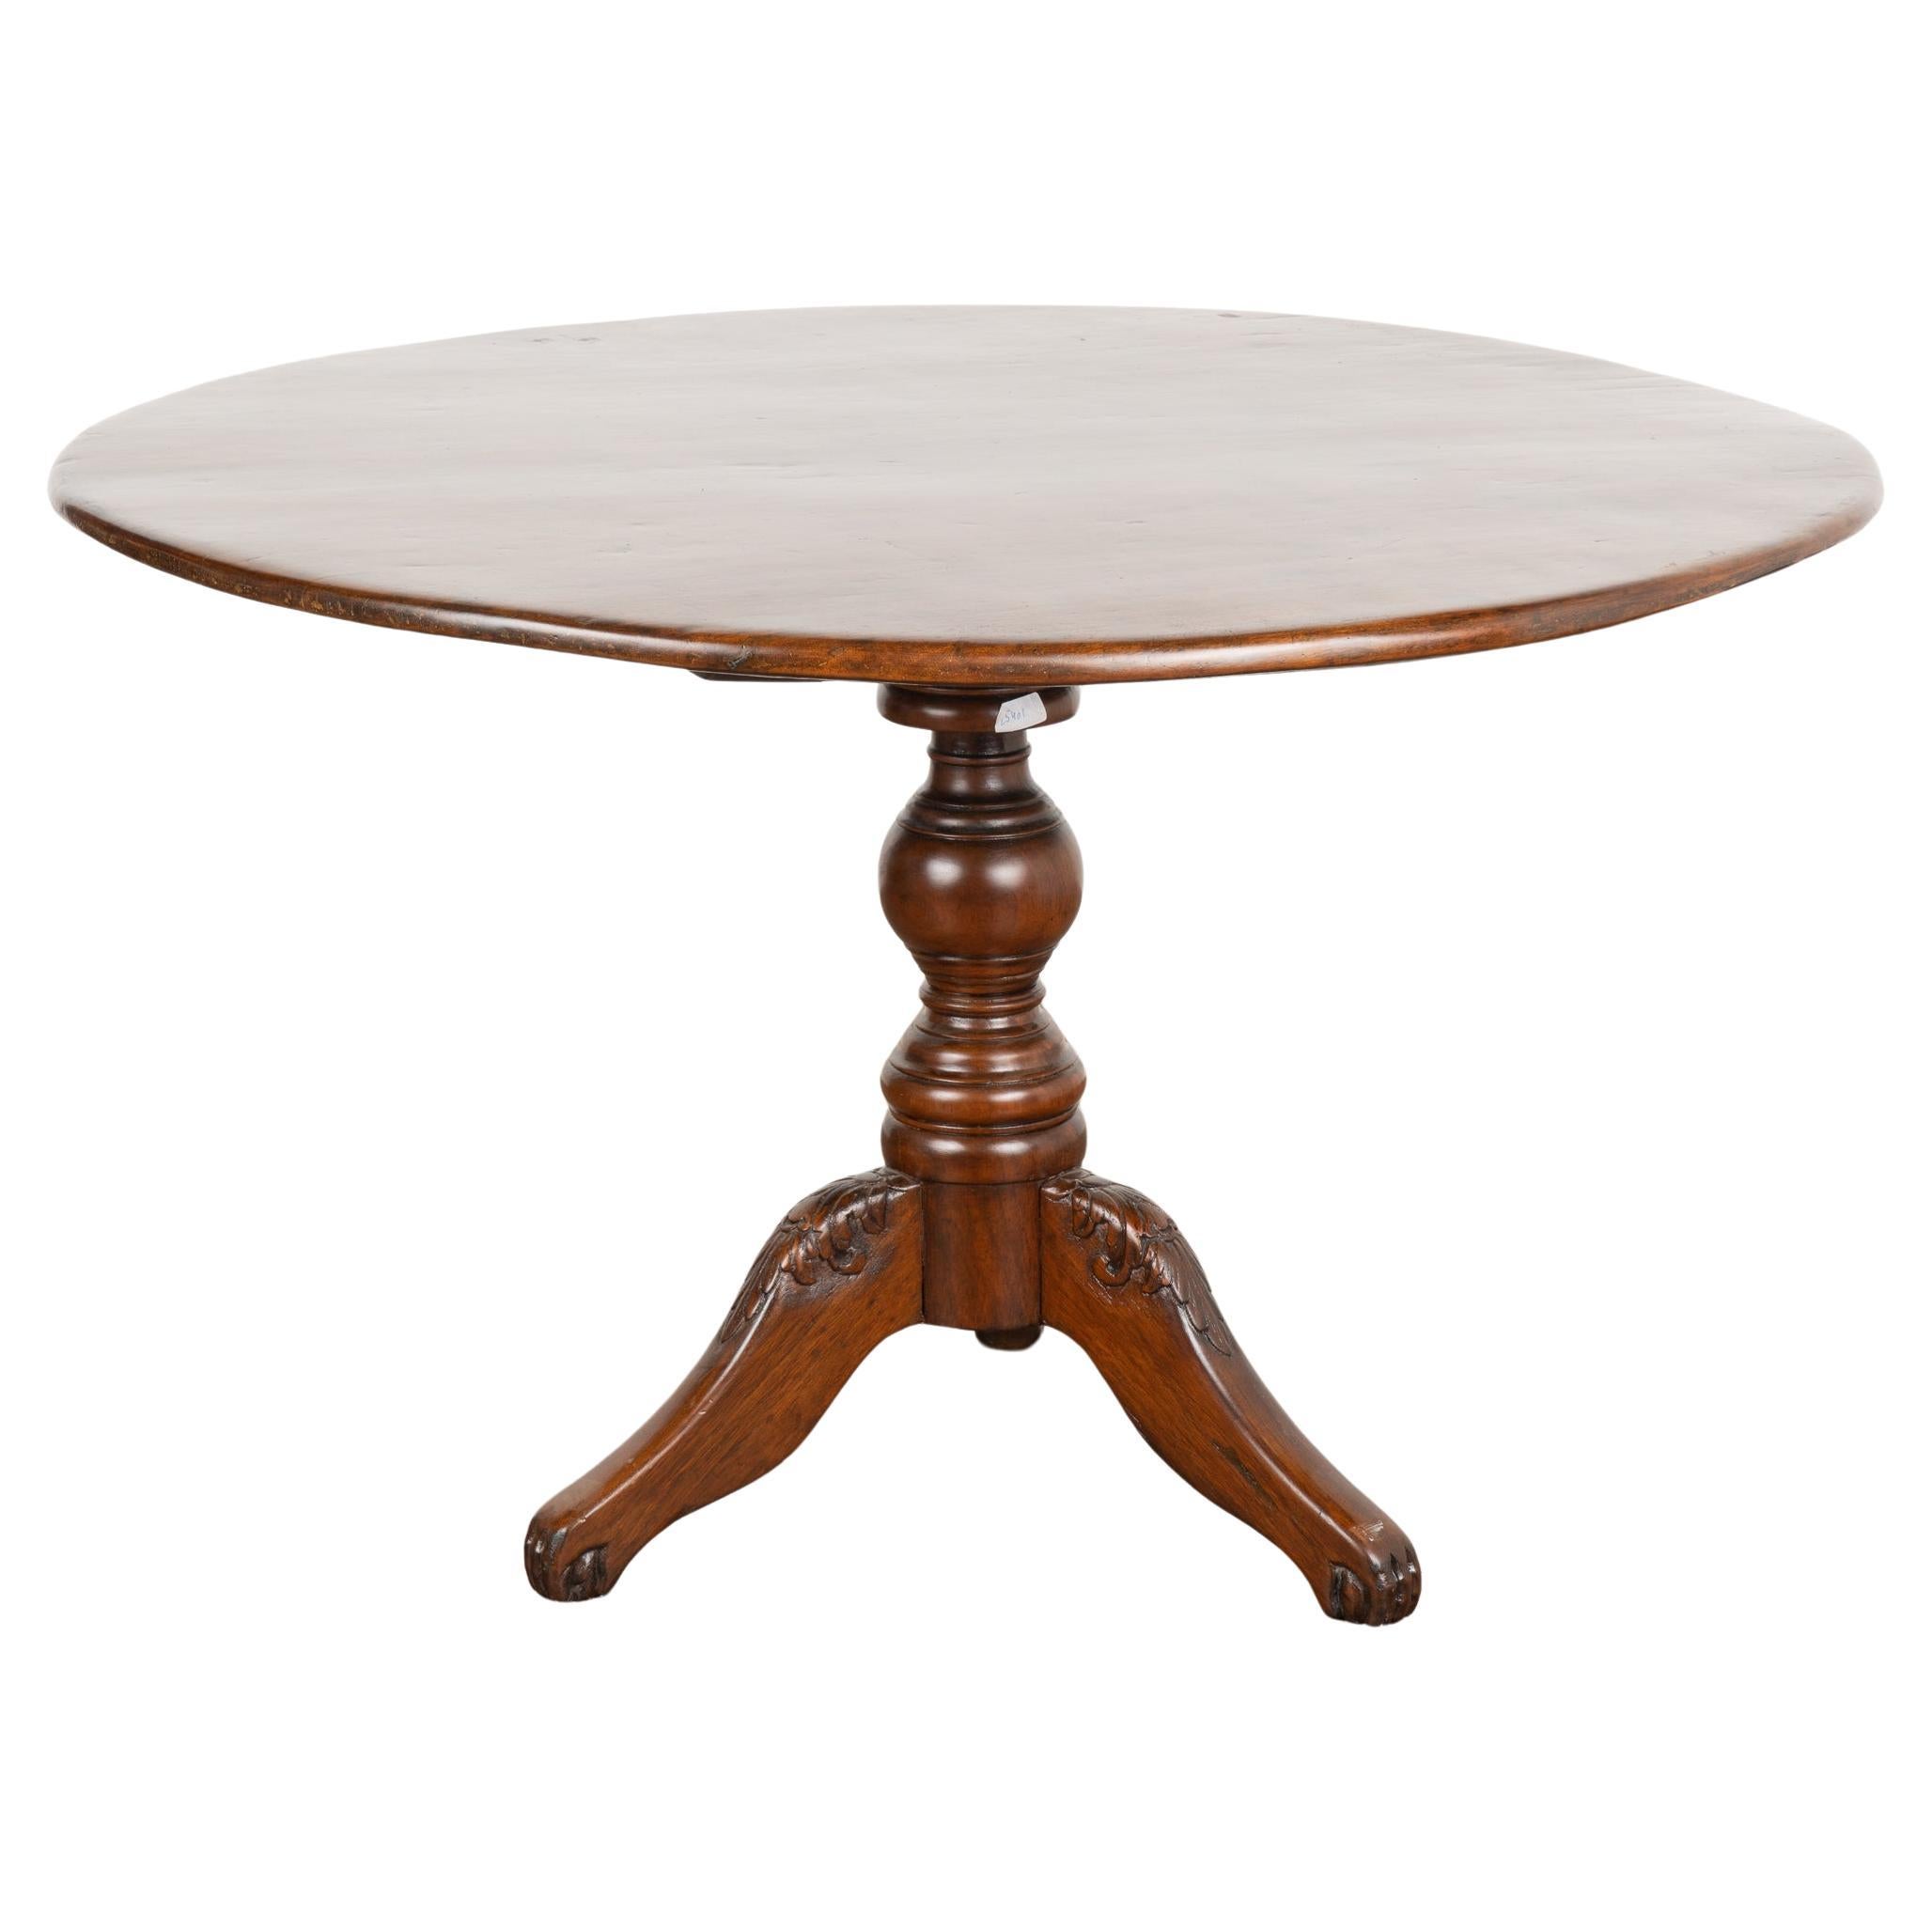 Round Narra Wood Pedestal Table, Philippines circa 1840-60 For Sale